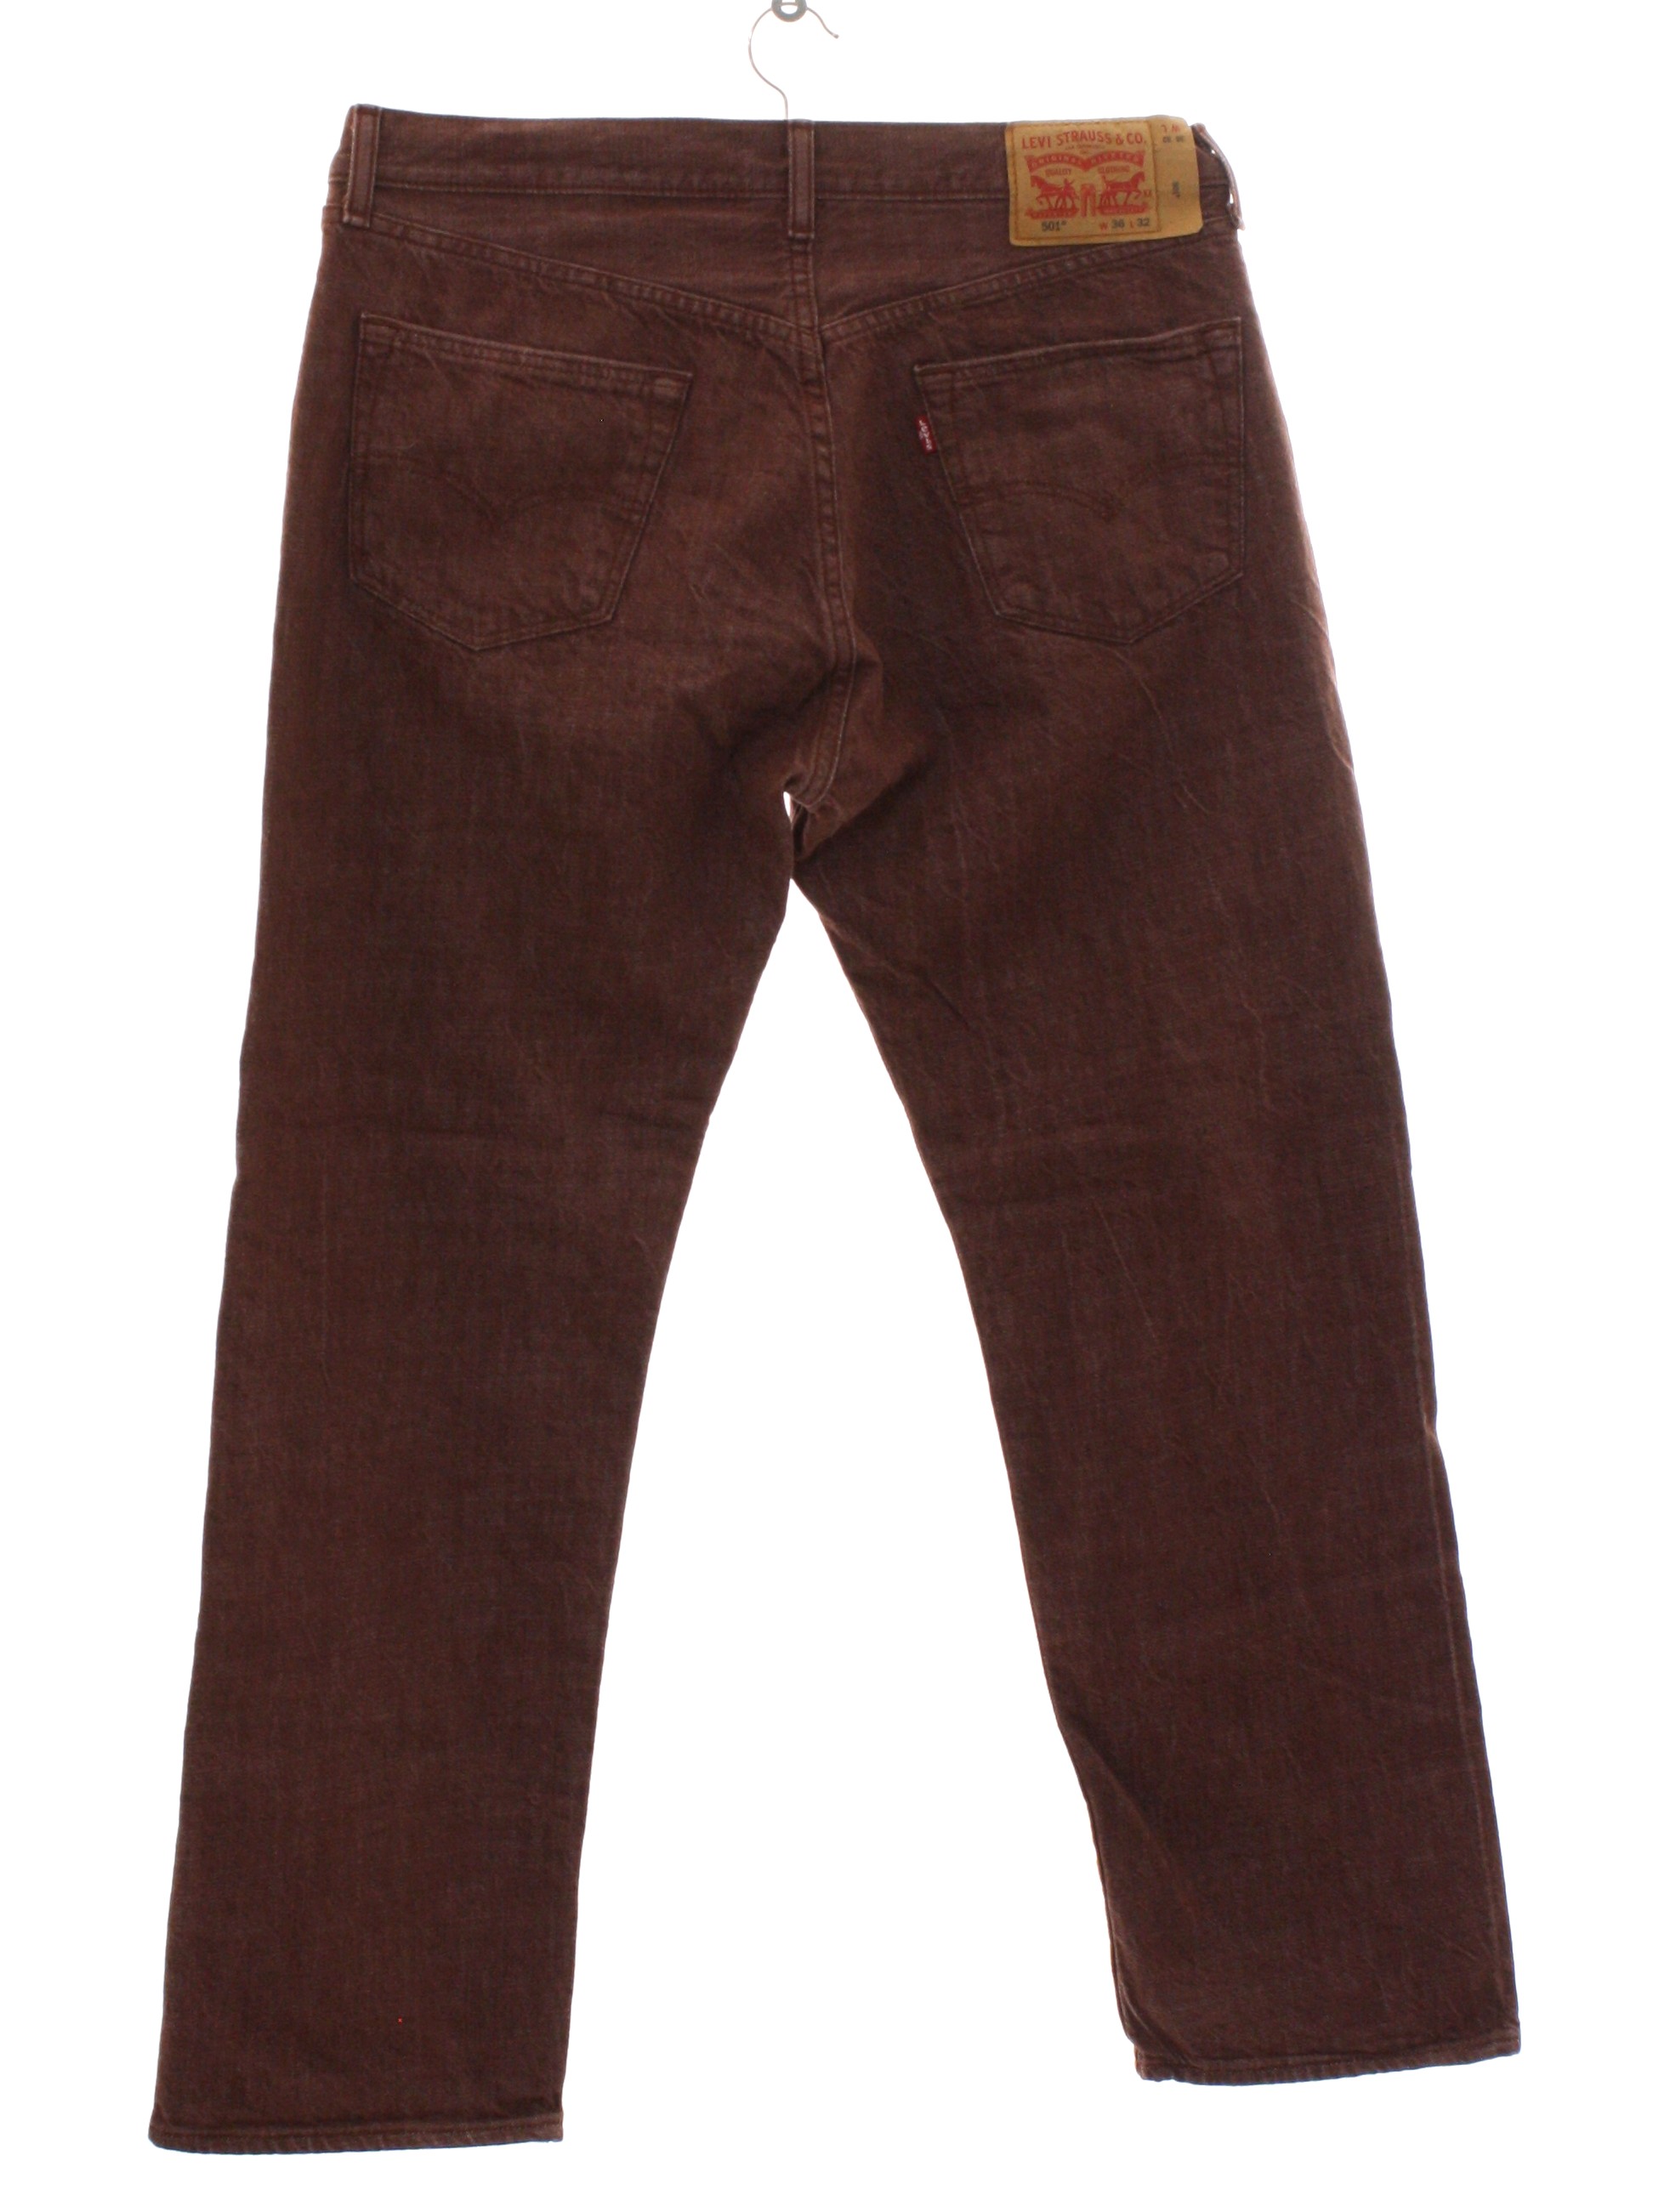 Pants: 90s -Levis 501 White Cone Denim- Mens as-new rosewood brown cotton denim  levis 501 straight leg denim jeans pants with button fly closure. Five  pocket style - front scoop pockets with